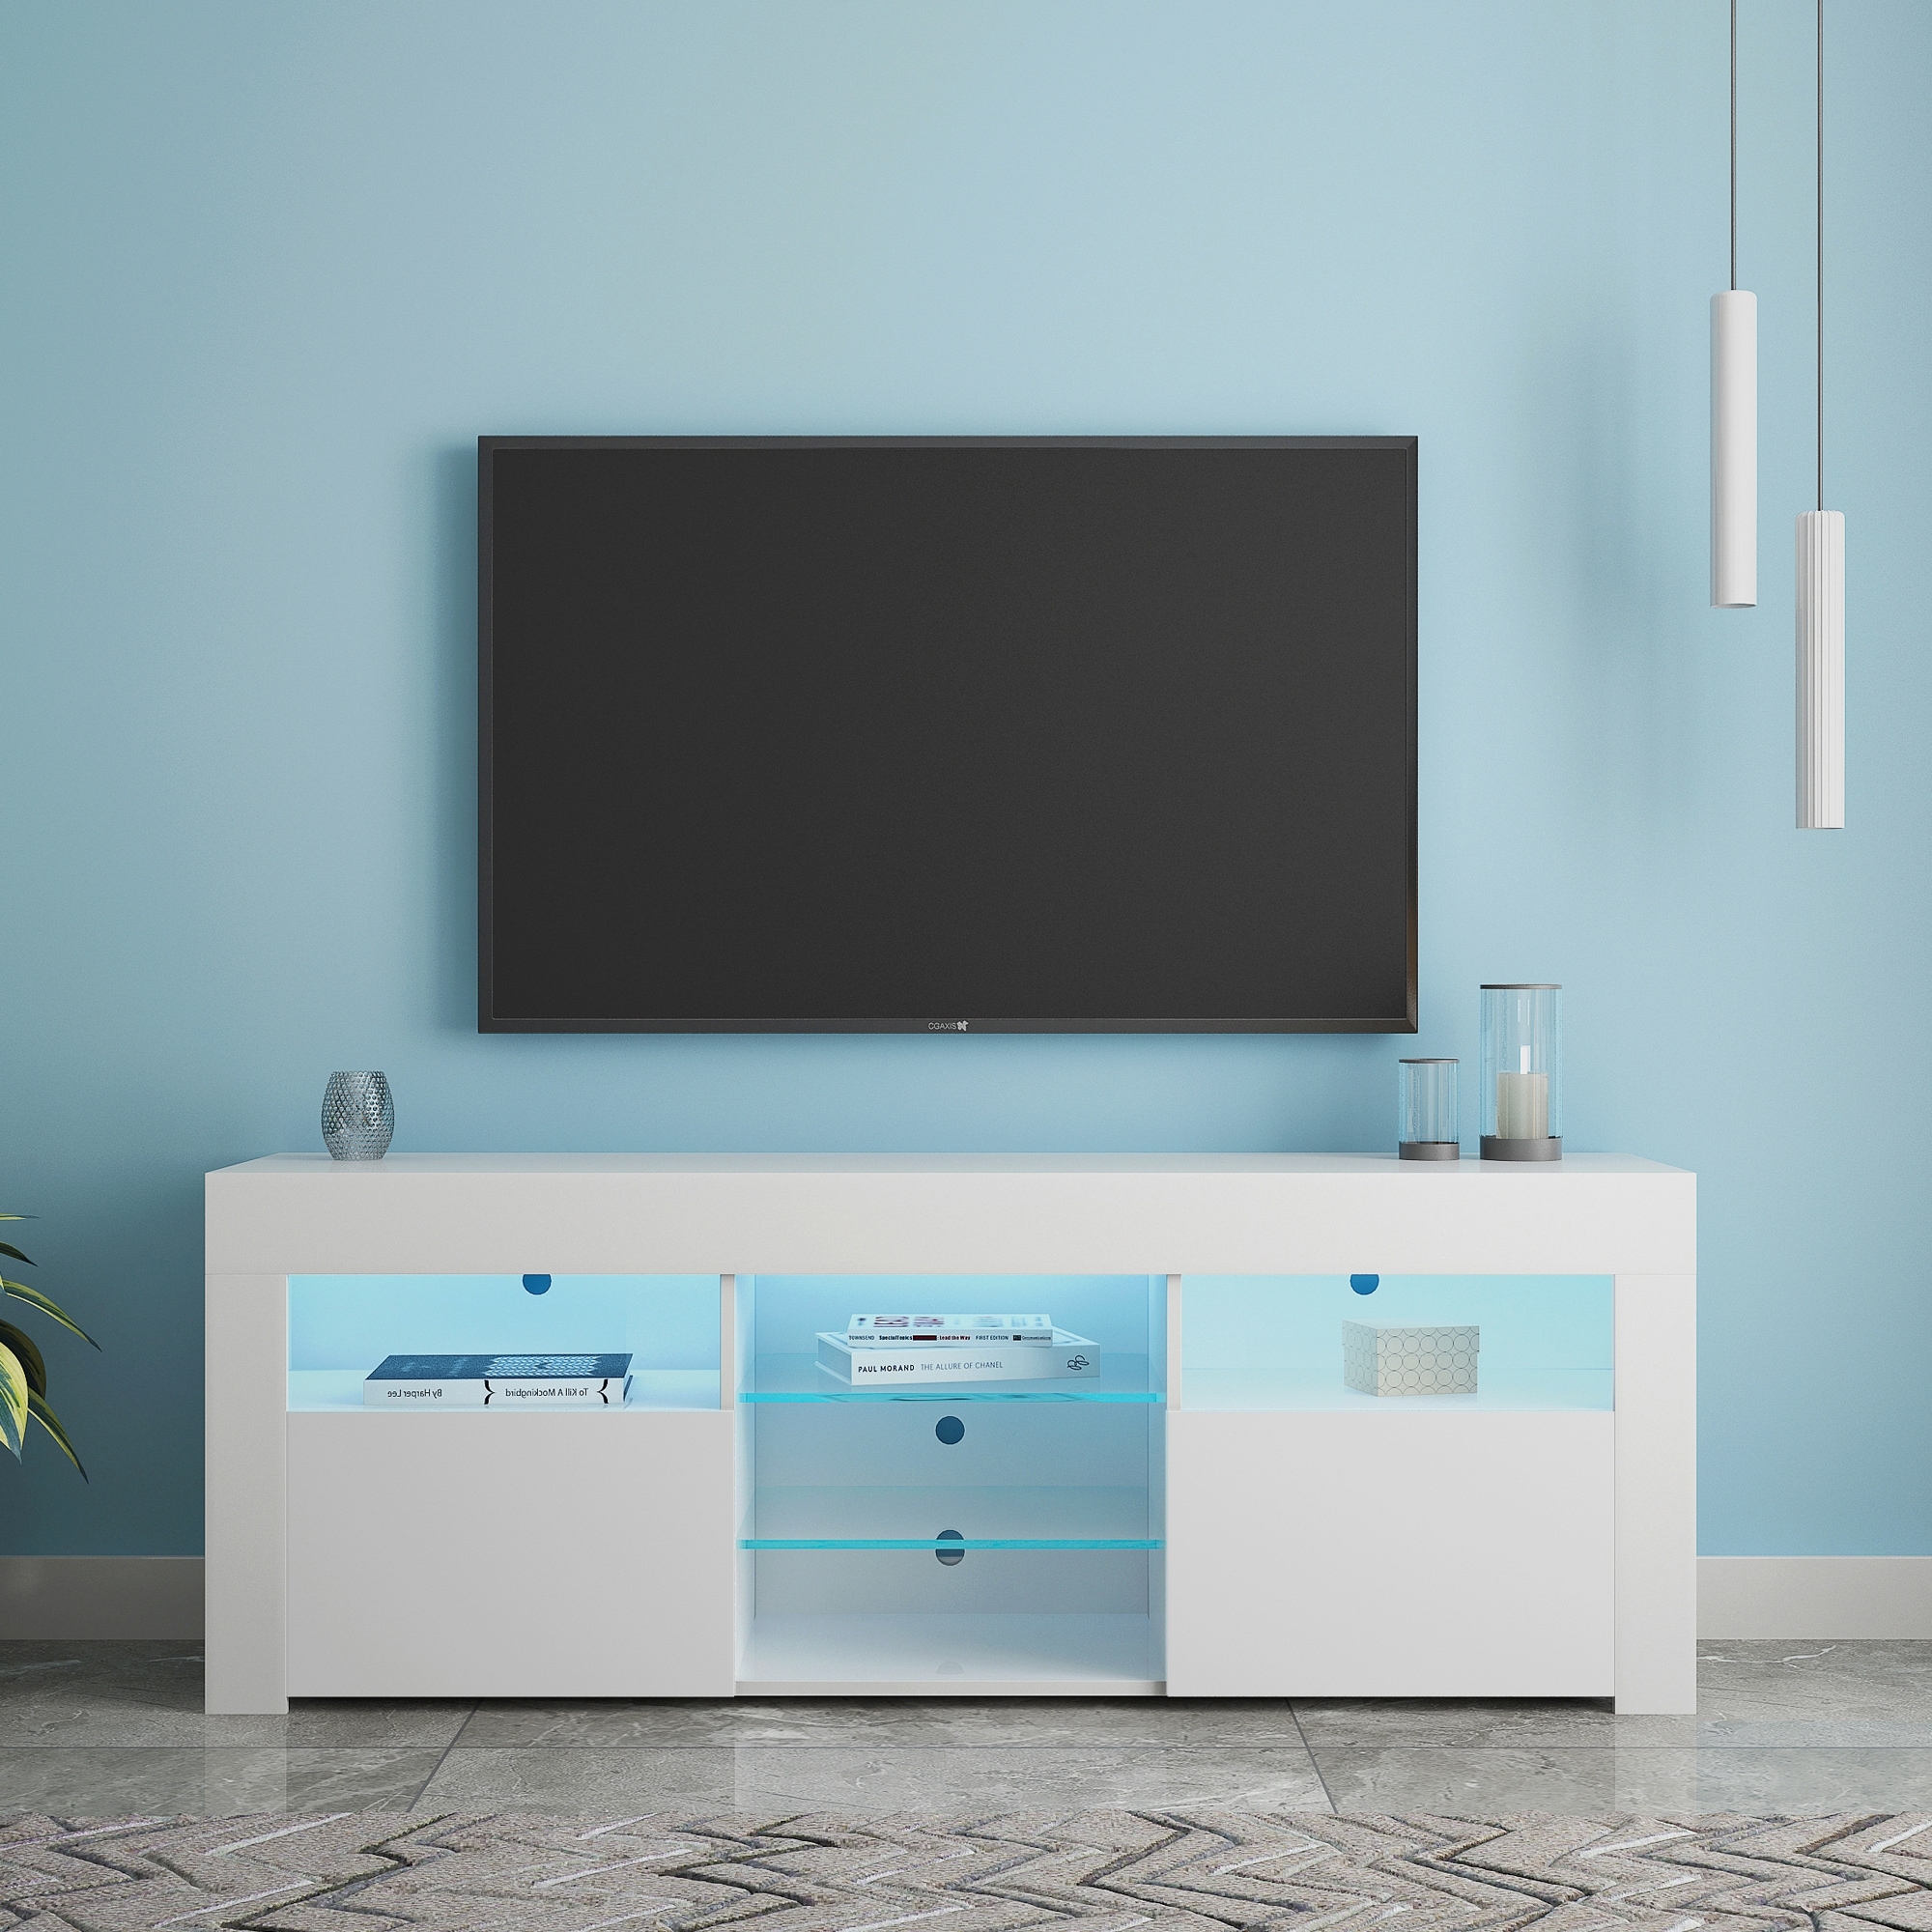 145 Modern 57 Tv Stand Matte Body High Gloss Fronts With 16 Color Leds and Two Doors And Two Open Cabinets